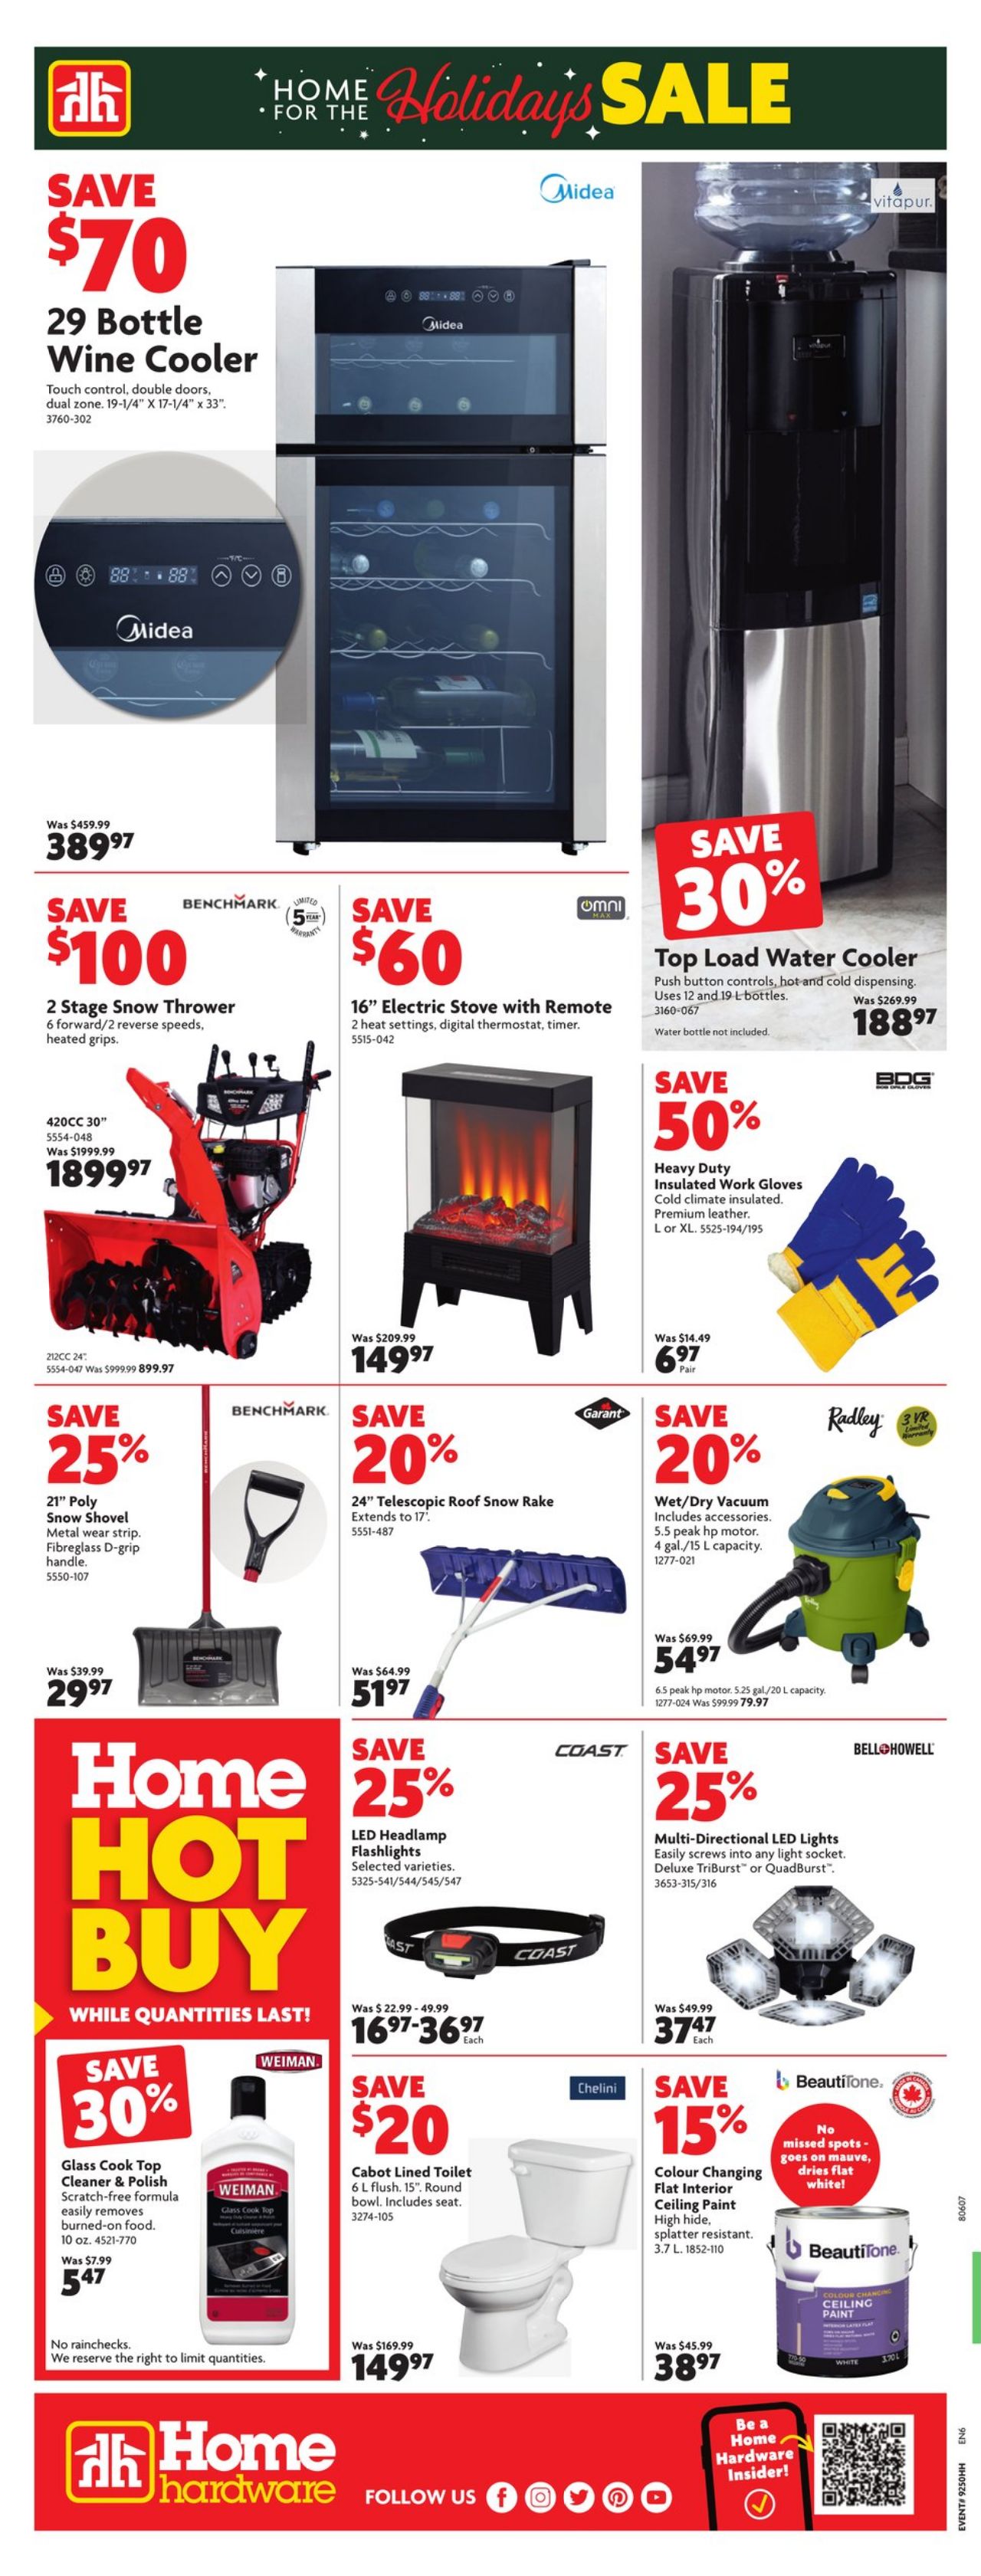 Home Hardware Promotional Flyer Christmas Valid from 14.12 to 20.12